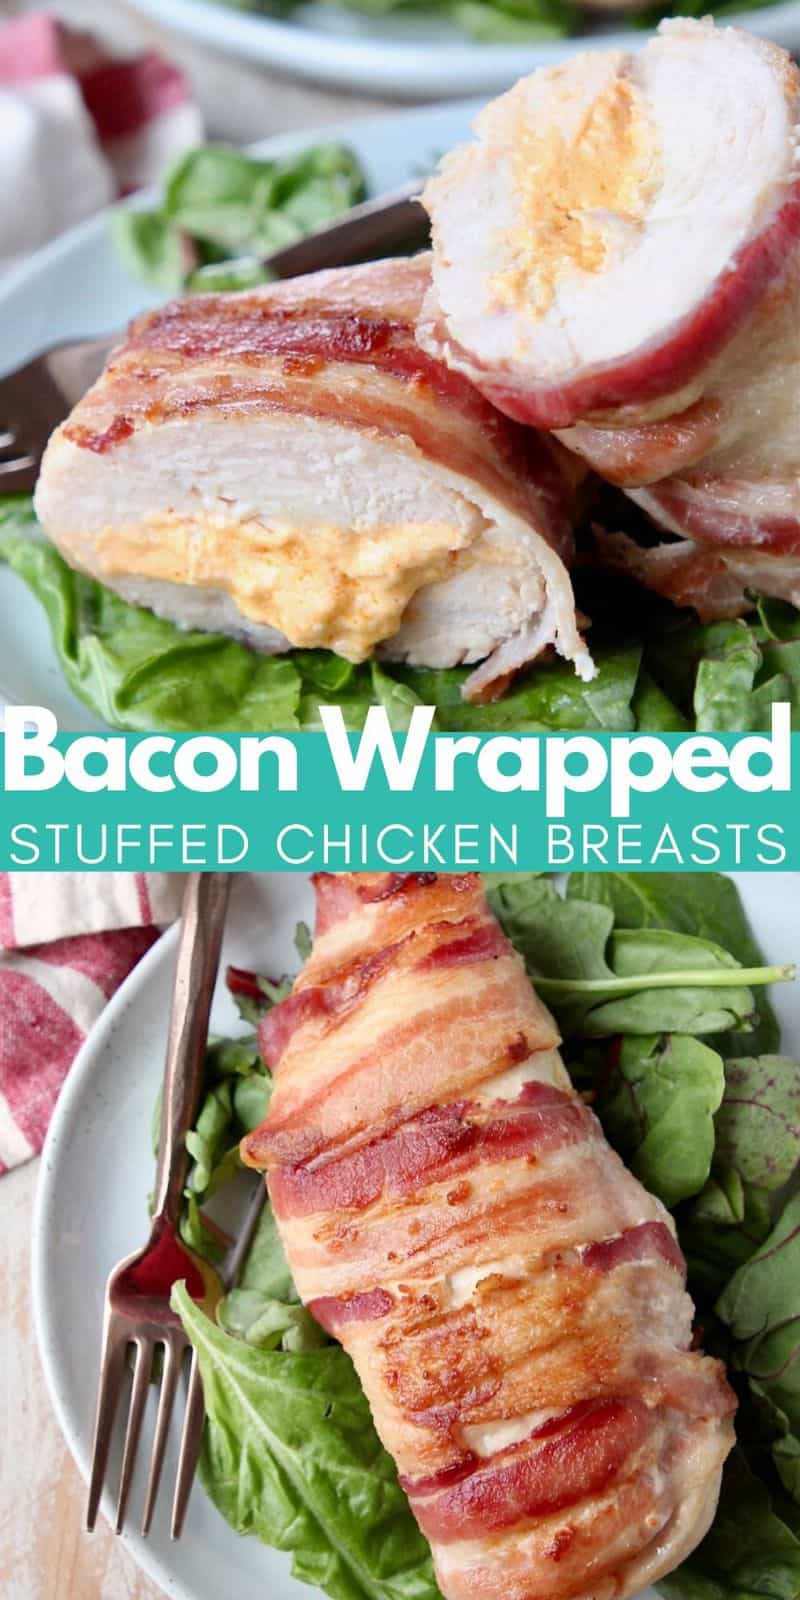 Bacon Wrapped Stuffed Chicken Breast Recipe - WhitneyBond.com